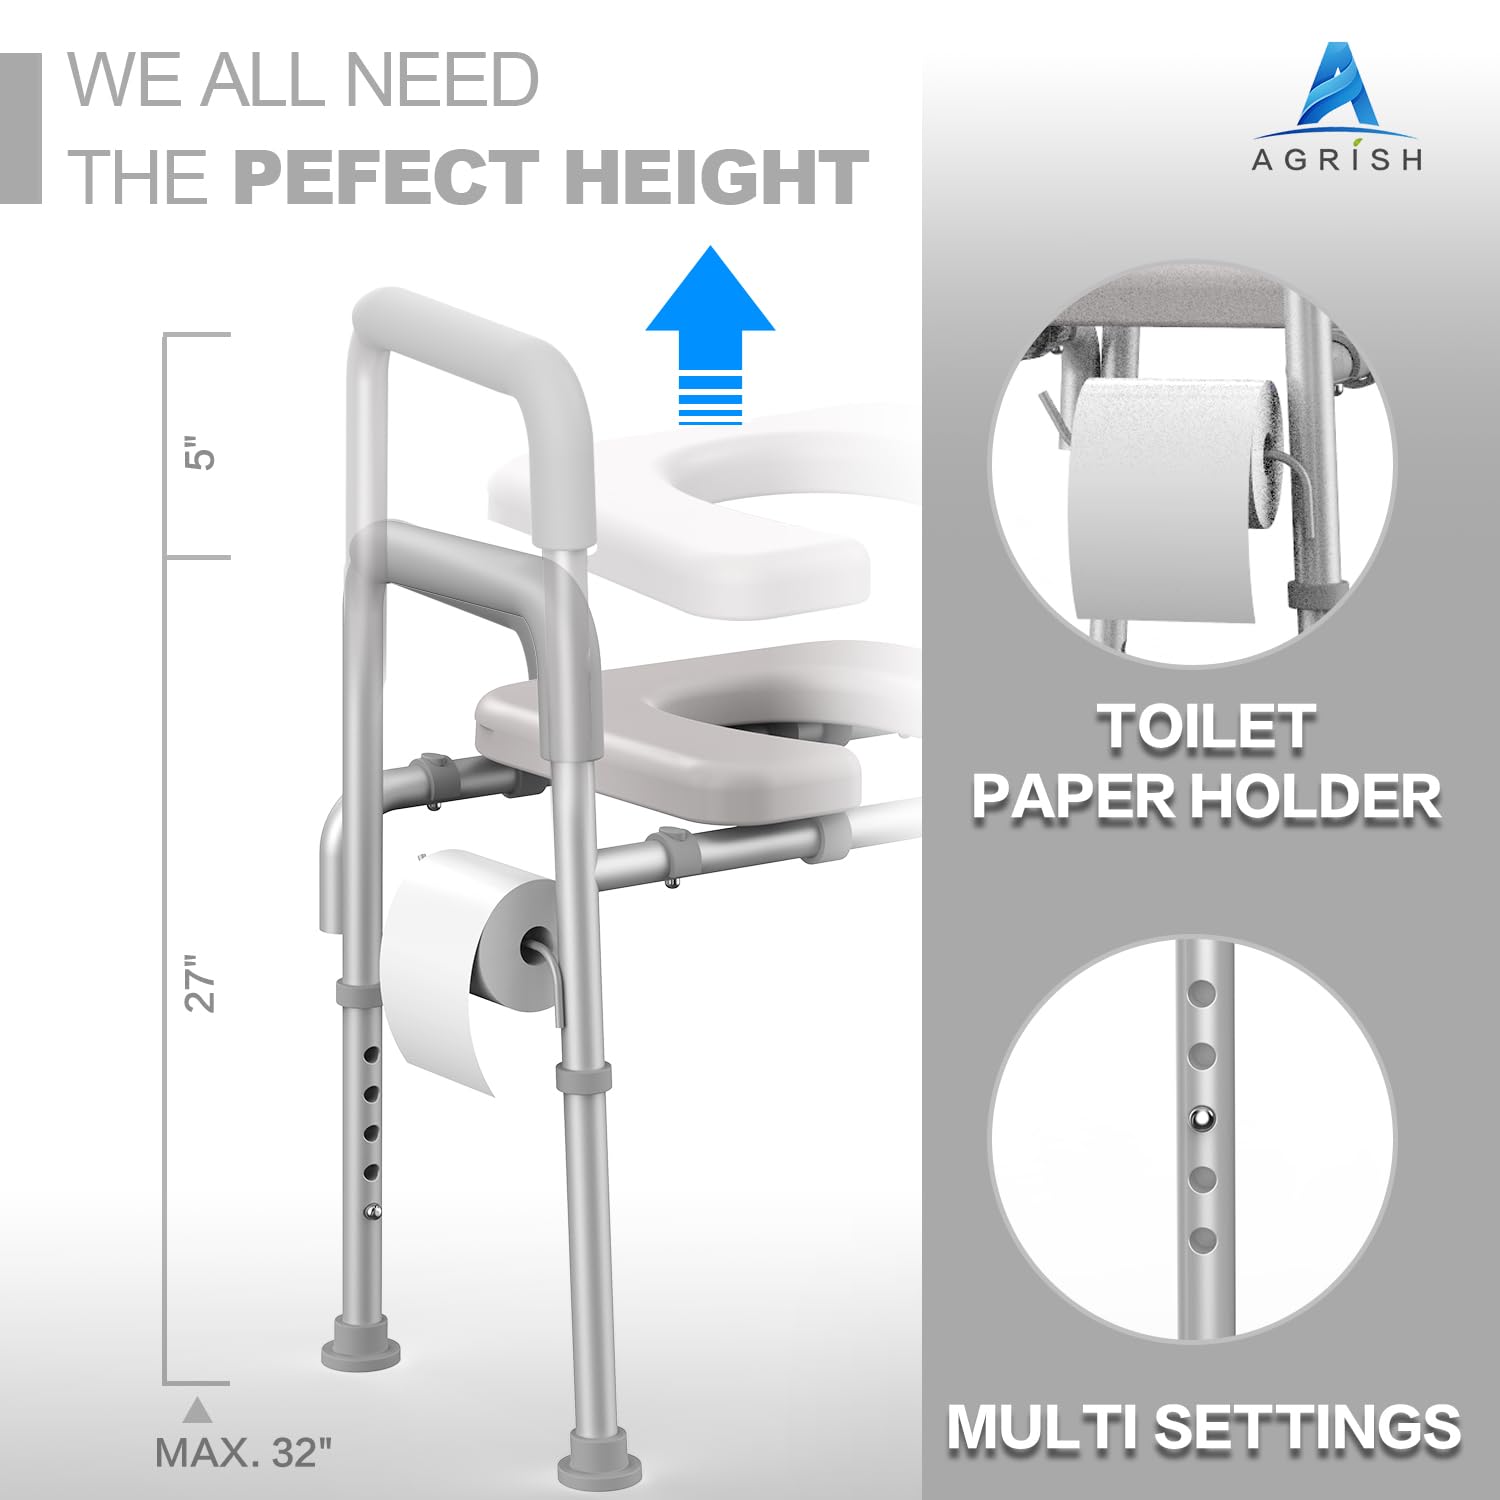 Agrish Raised Toilet Seat with Handles - Cozy Padded Elevated Medical Toilet Seat Riser, 350lb Adjustable Safety Assist Shower Chair for Elderly, Handicap, Pregnant - Gray